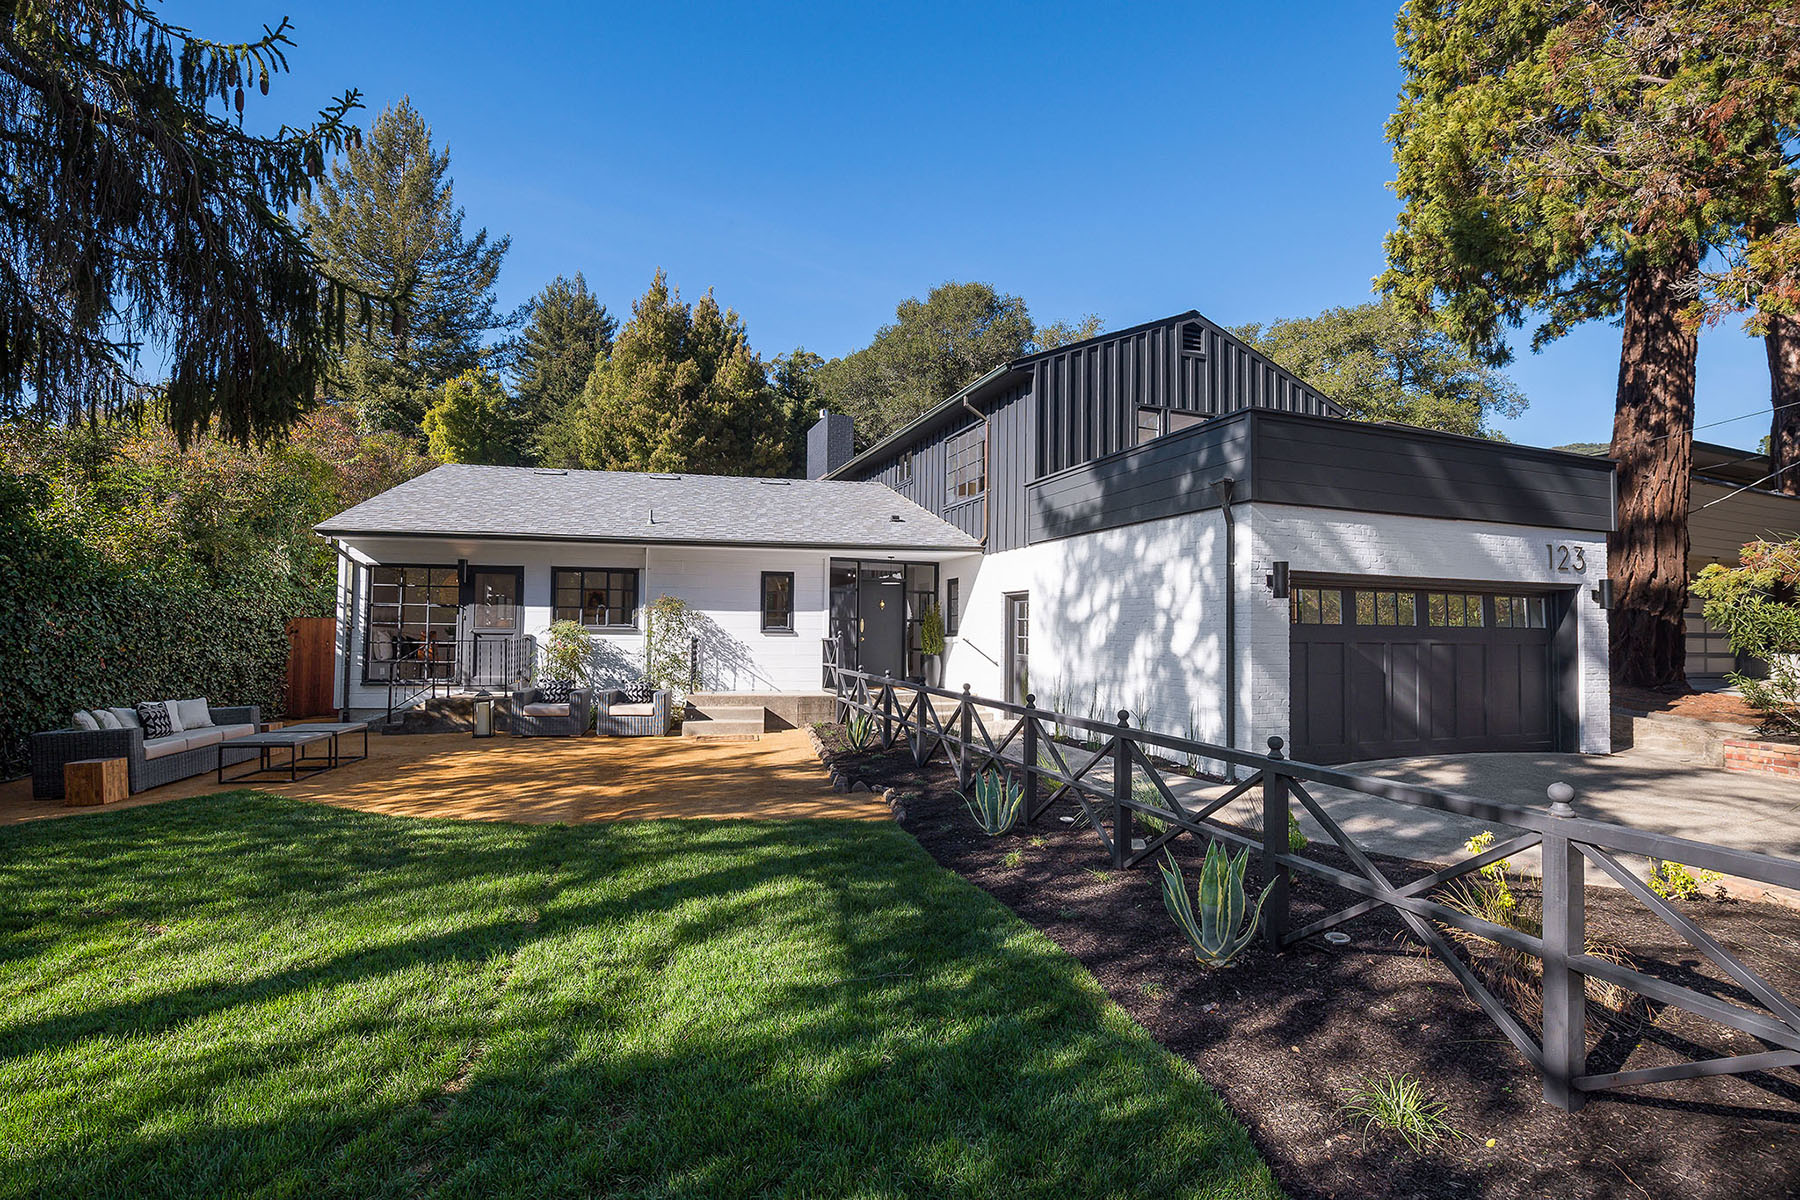 Feature image for Selling 123 Mountain View Avenue: From Frumpy To Fabulous 